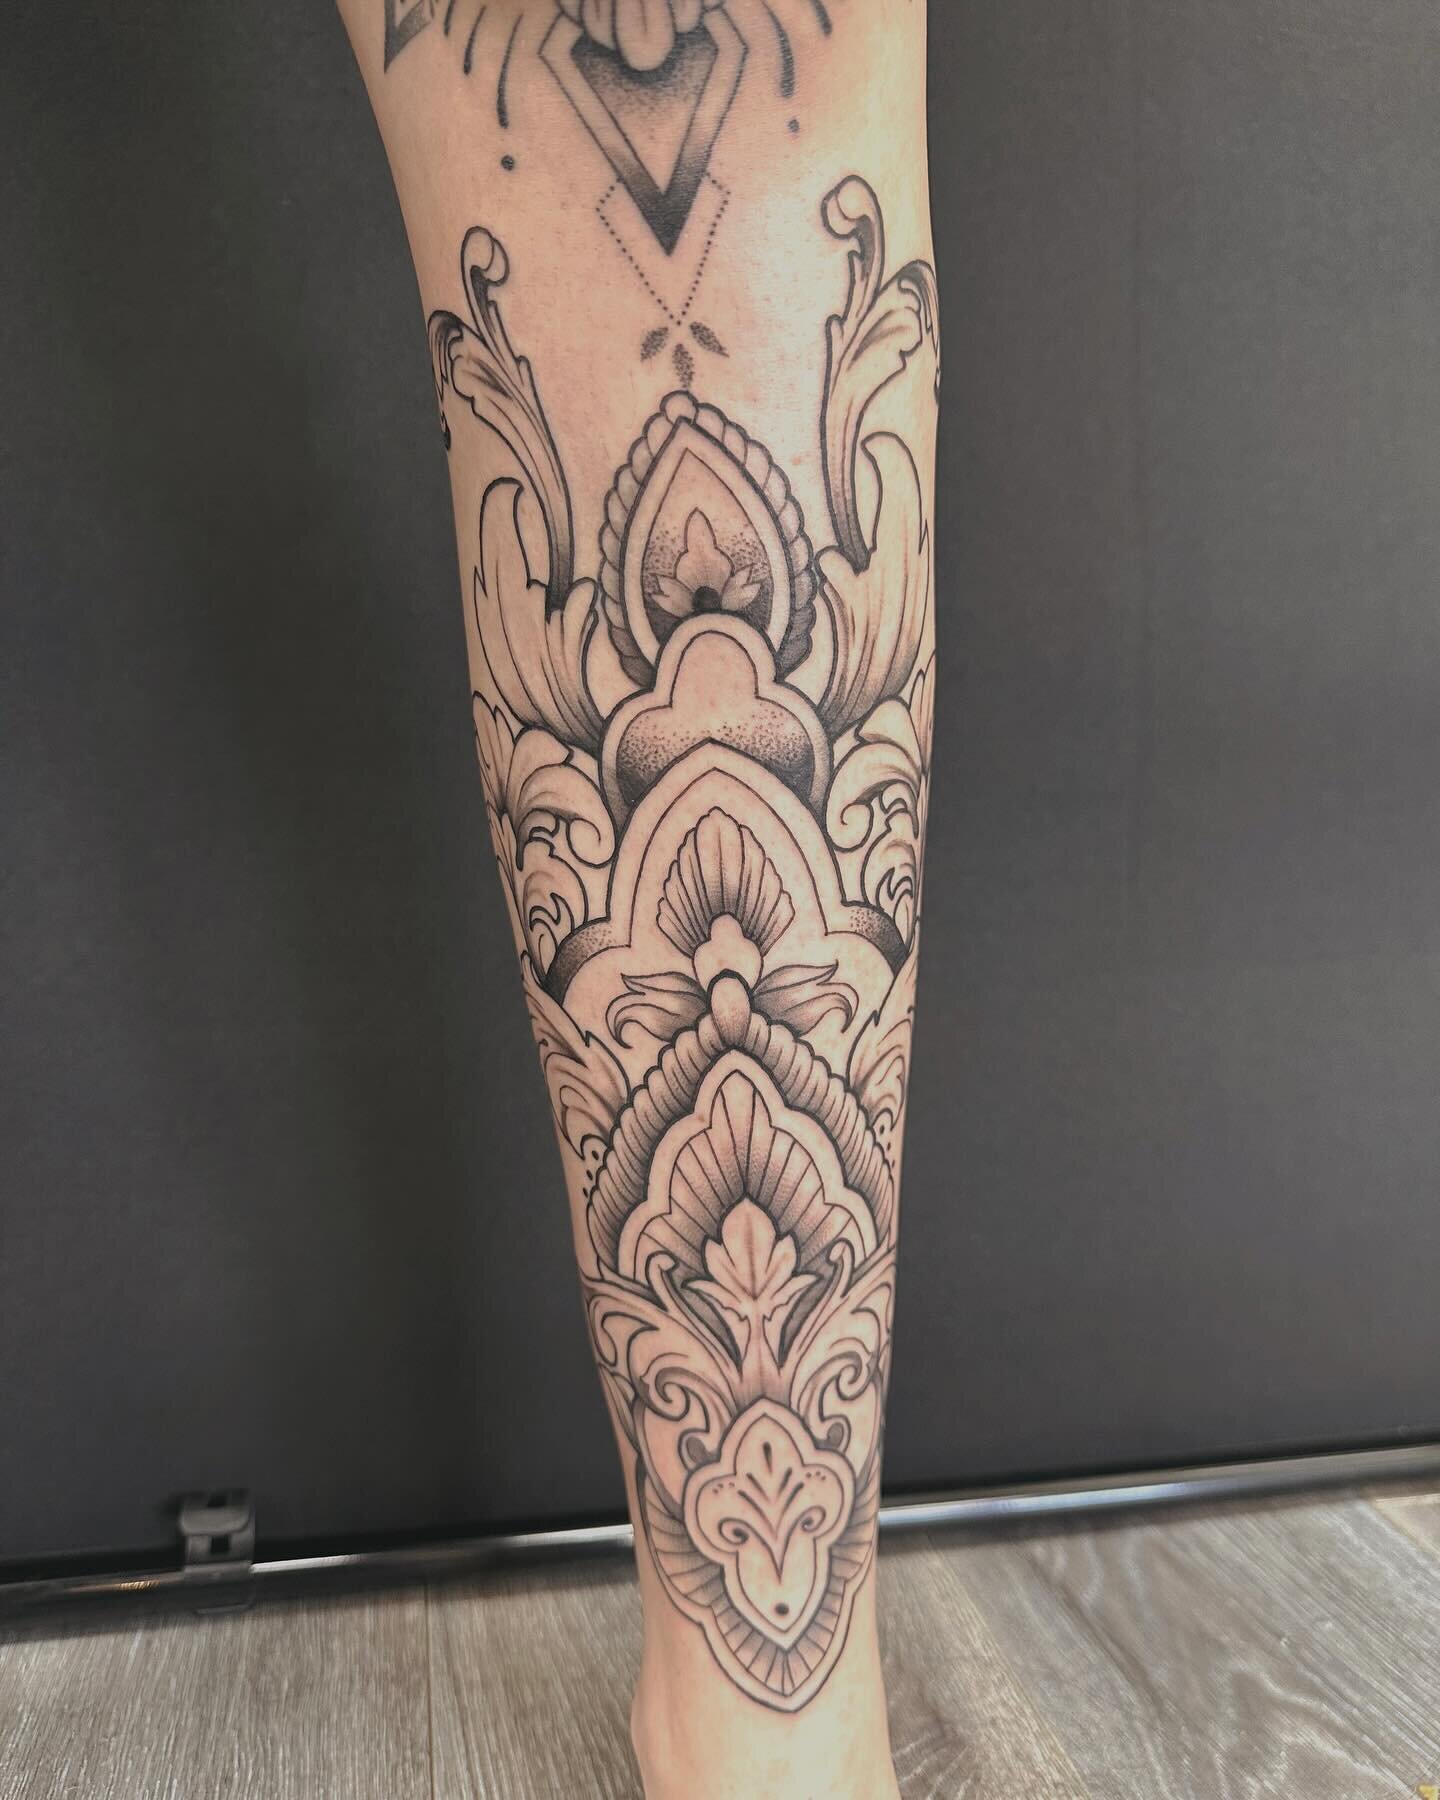 ⚜️leg adornment⚜️
Thanks so much for coming in and sitting so well , your a machine 🫡💕
.
.
.
.
.
.
.
.
.
.
.
.
.
.
.
#tattoo #ornamentaltattoo #pagan #gorh #gothic #witch #witchy #witchesofinstagram